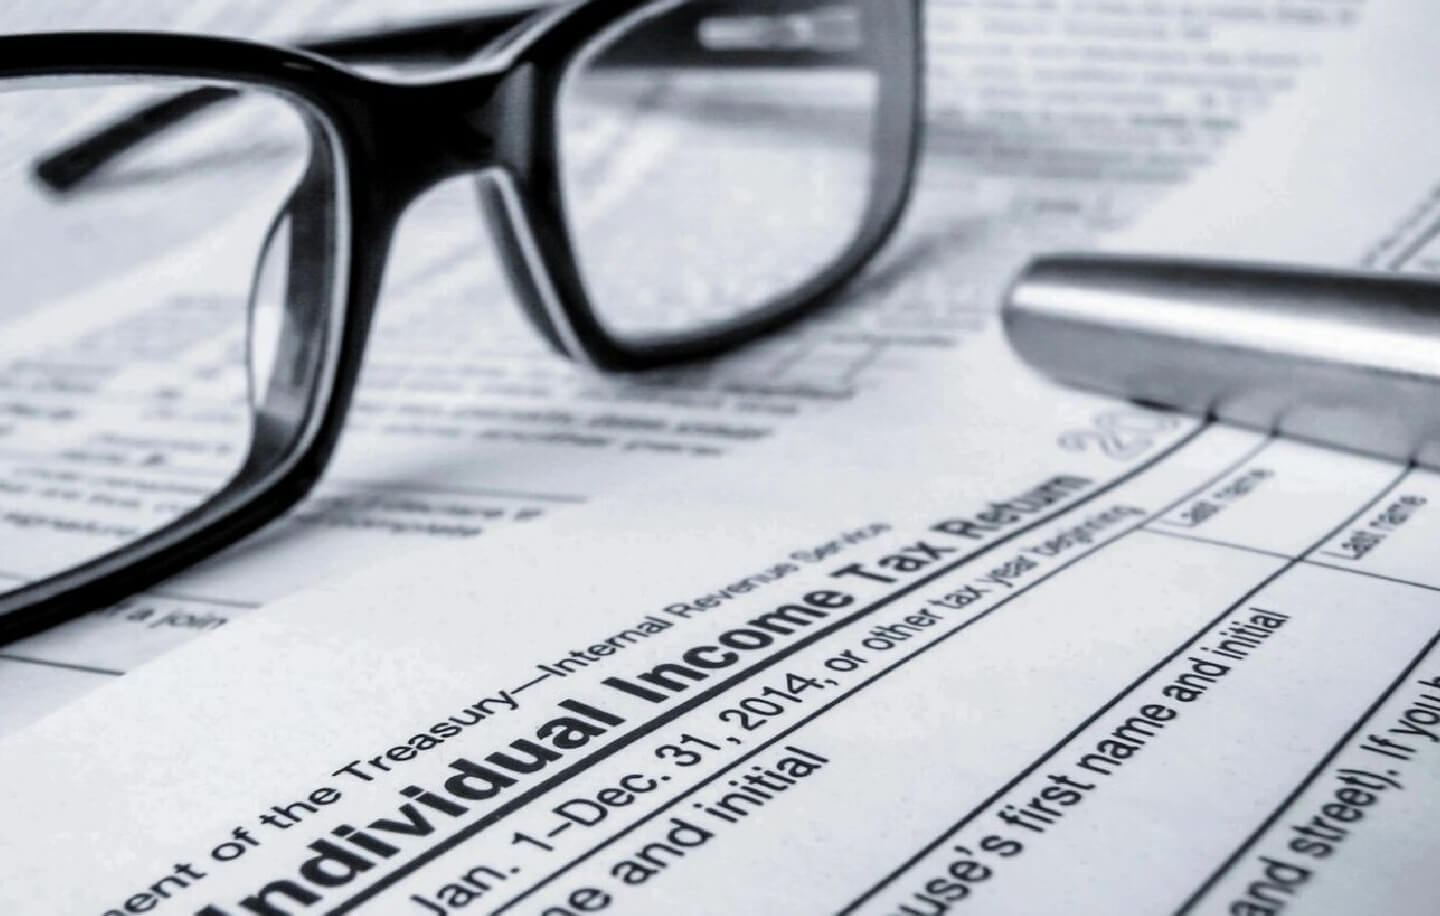 A picture of the spectacles on the income tax return form